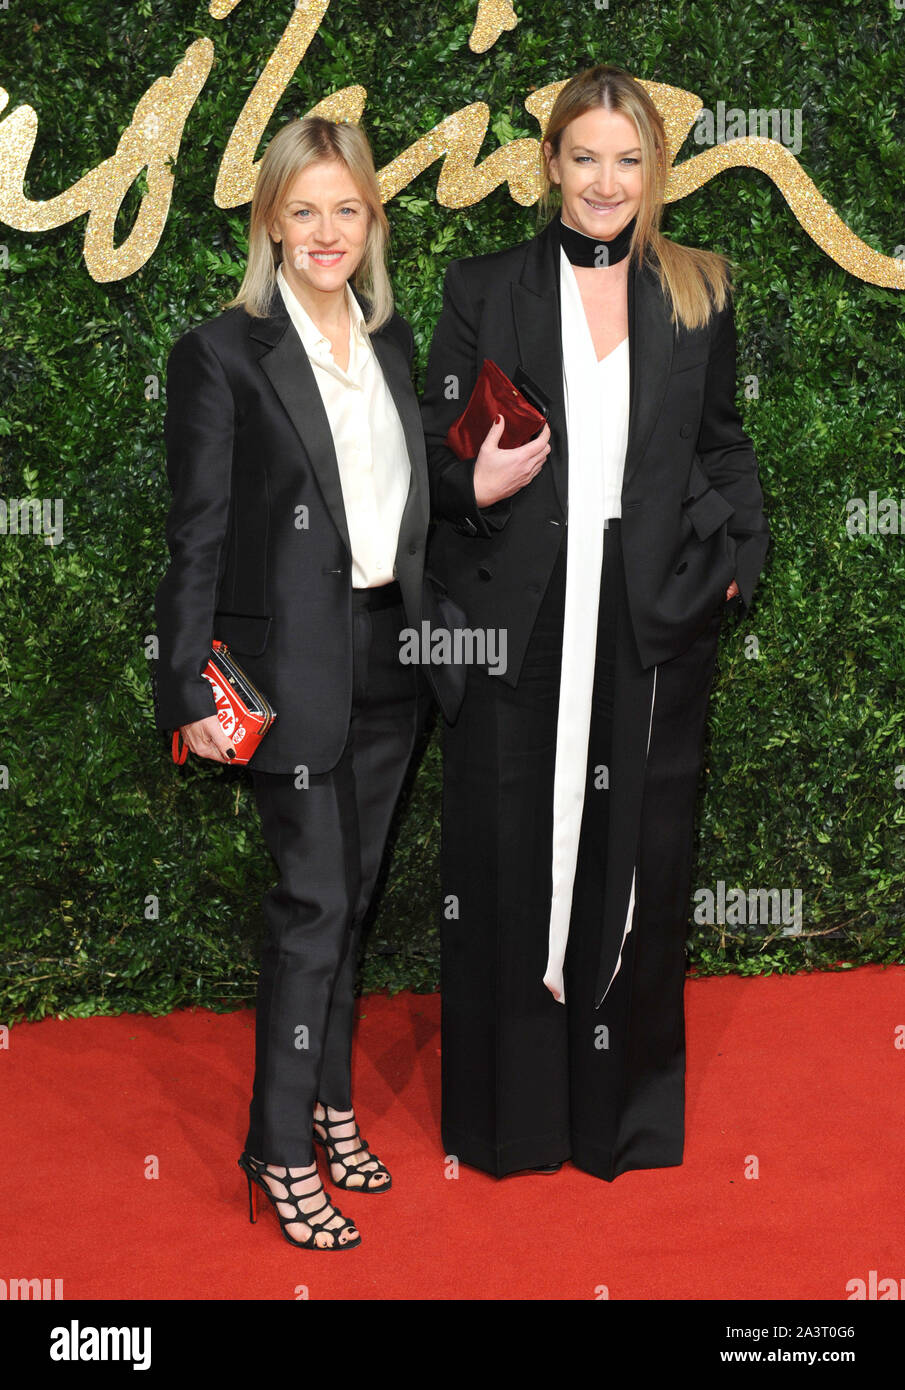 Photo Must Be Credited ©Kate Green/Alpha Press 079965 23/11/2015 Guest and Anya Hindmarch at The British Fashion Awards 2015 held at The Coliseum in London. Stock Photo